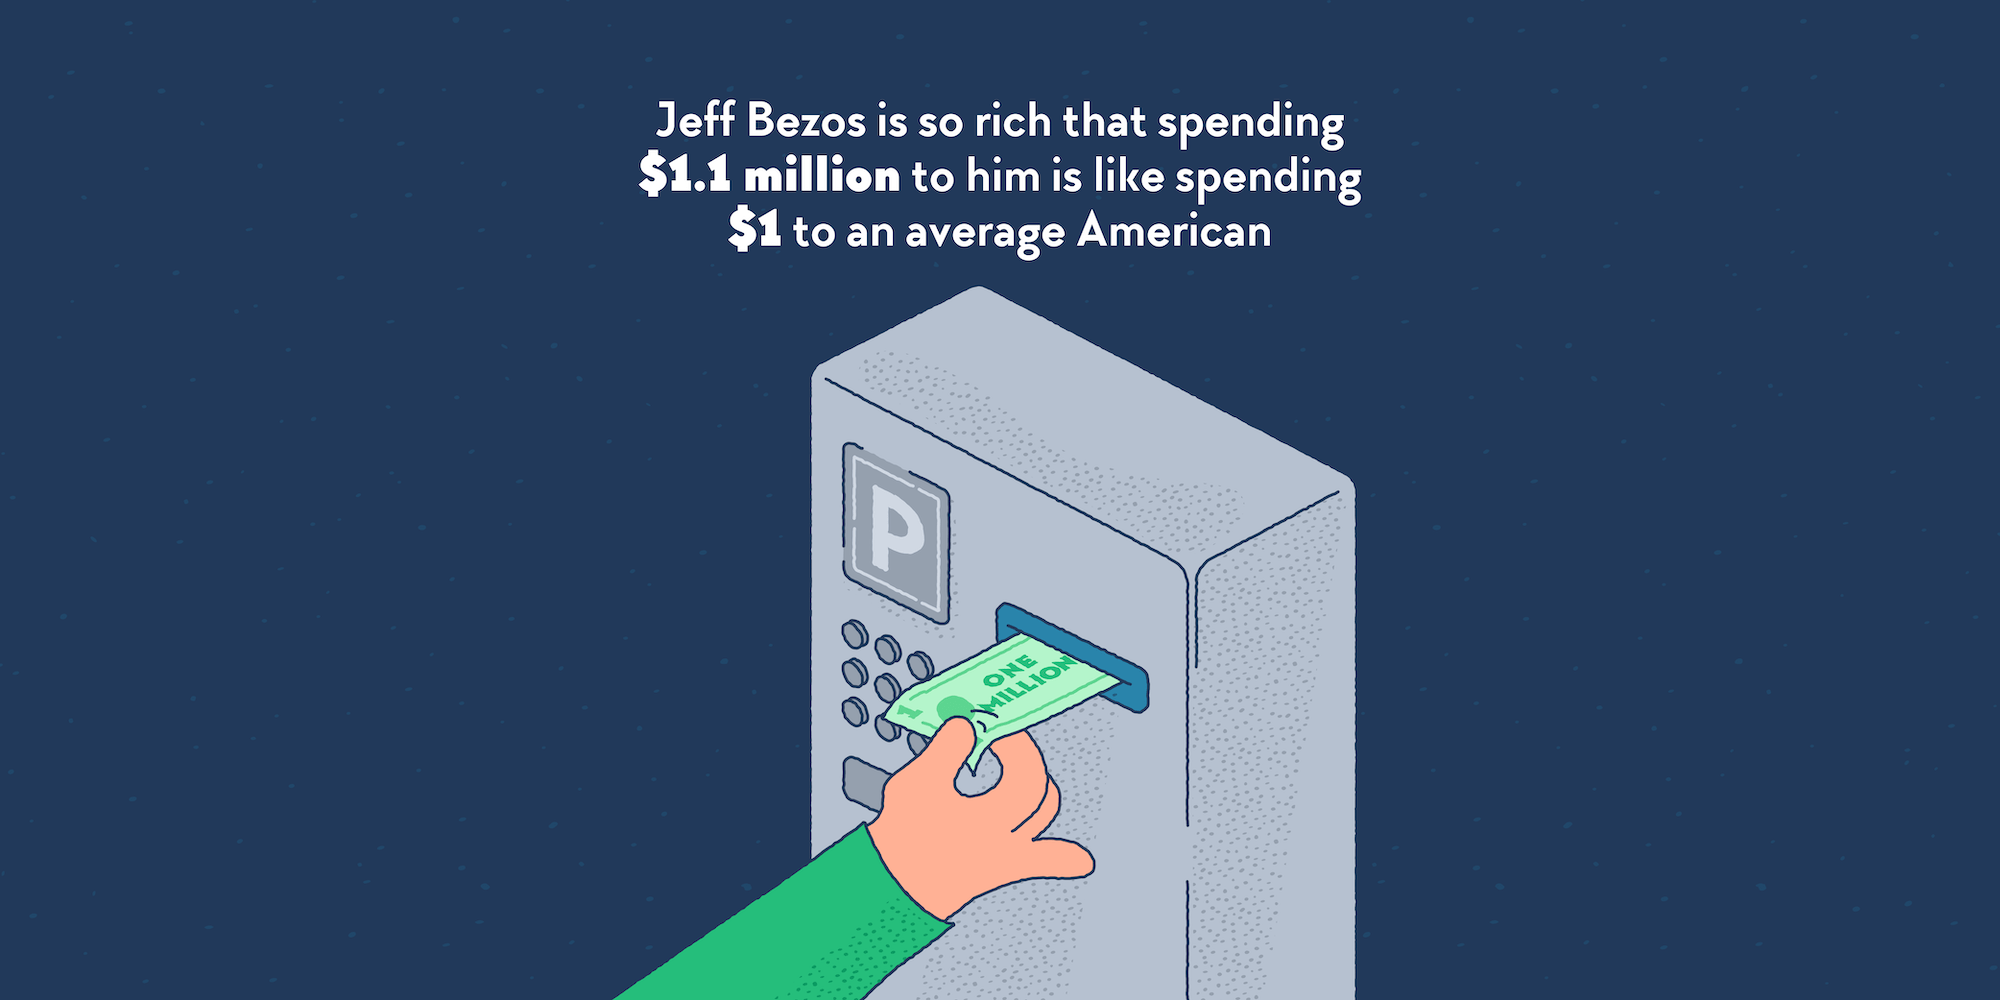 A parking meter machine on which you can pay with a bank note. Jeff Bezos’ hand is seen paying with a one million dollars note.